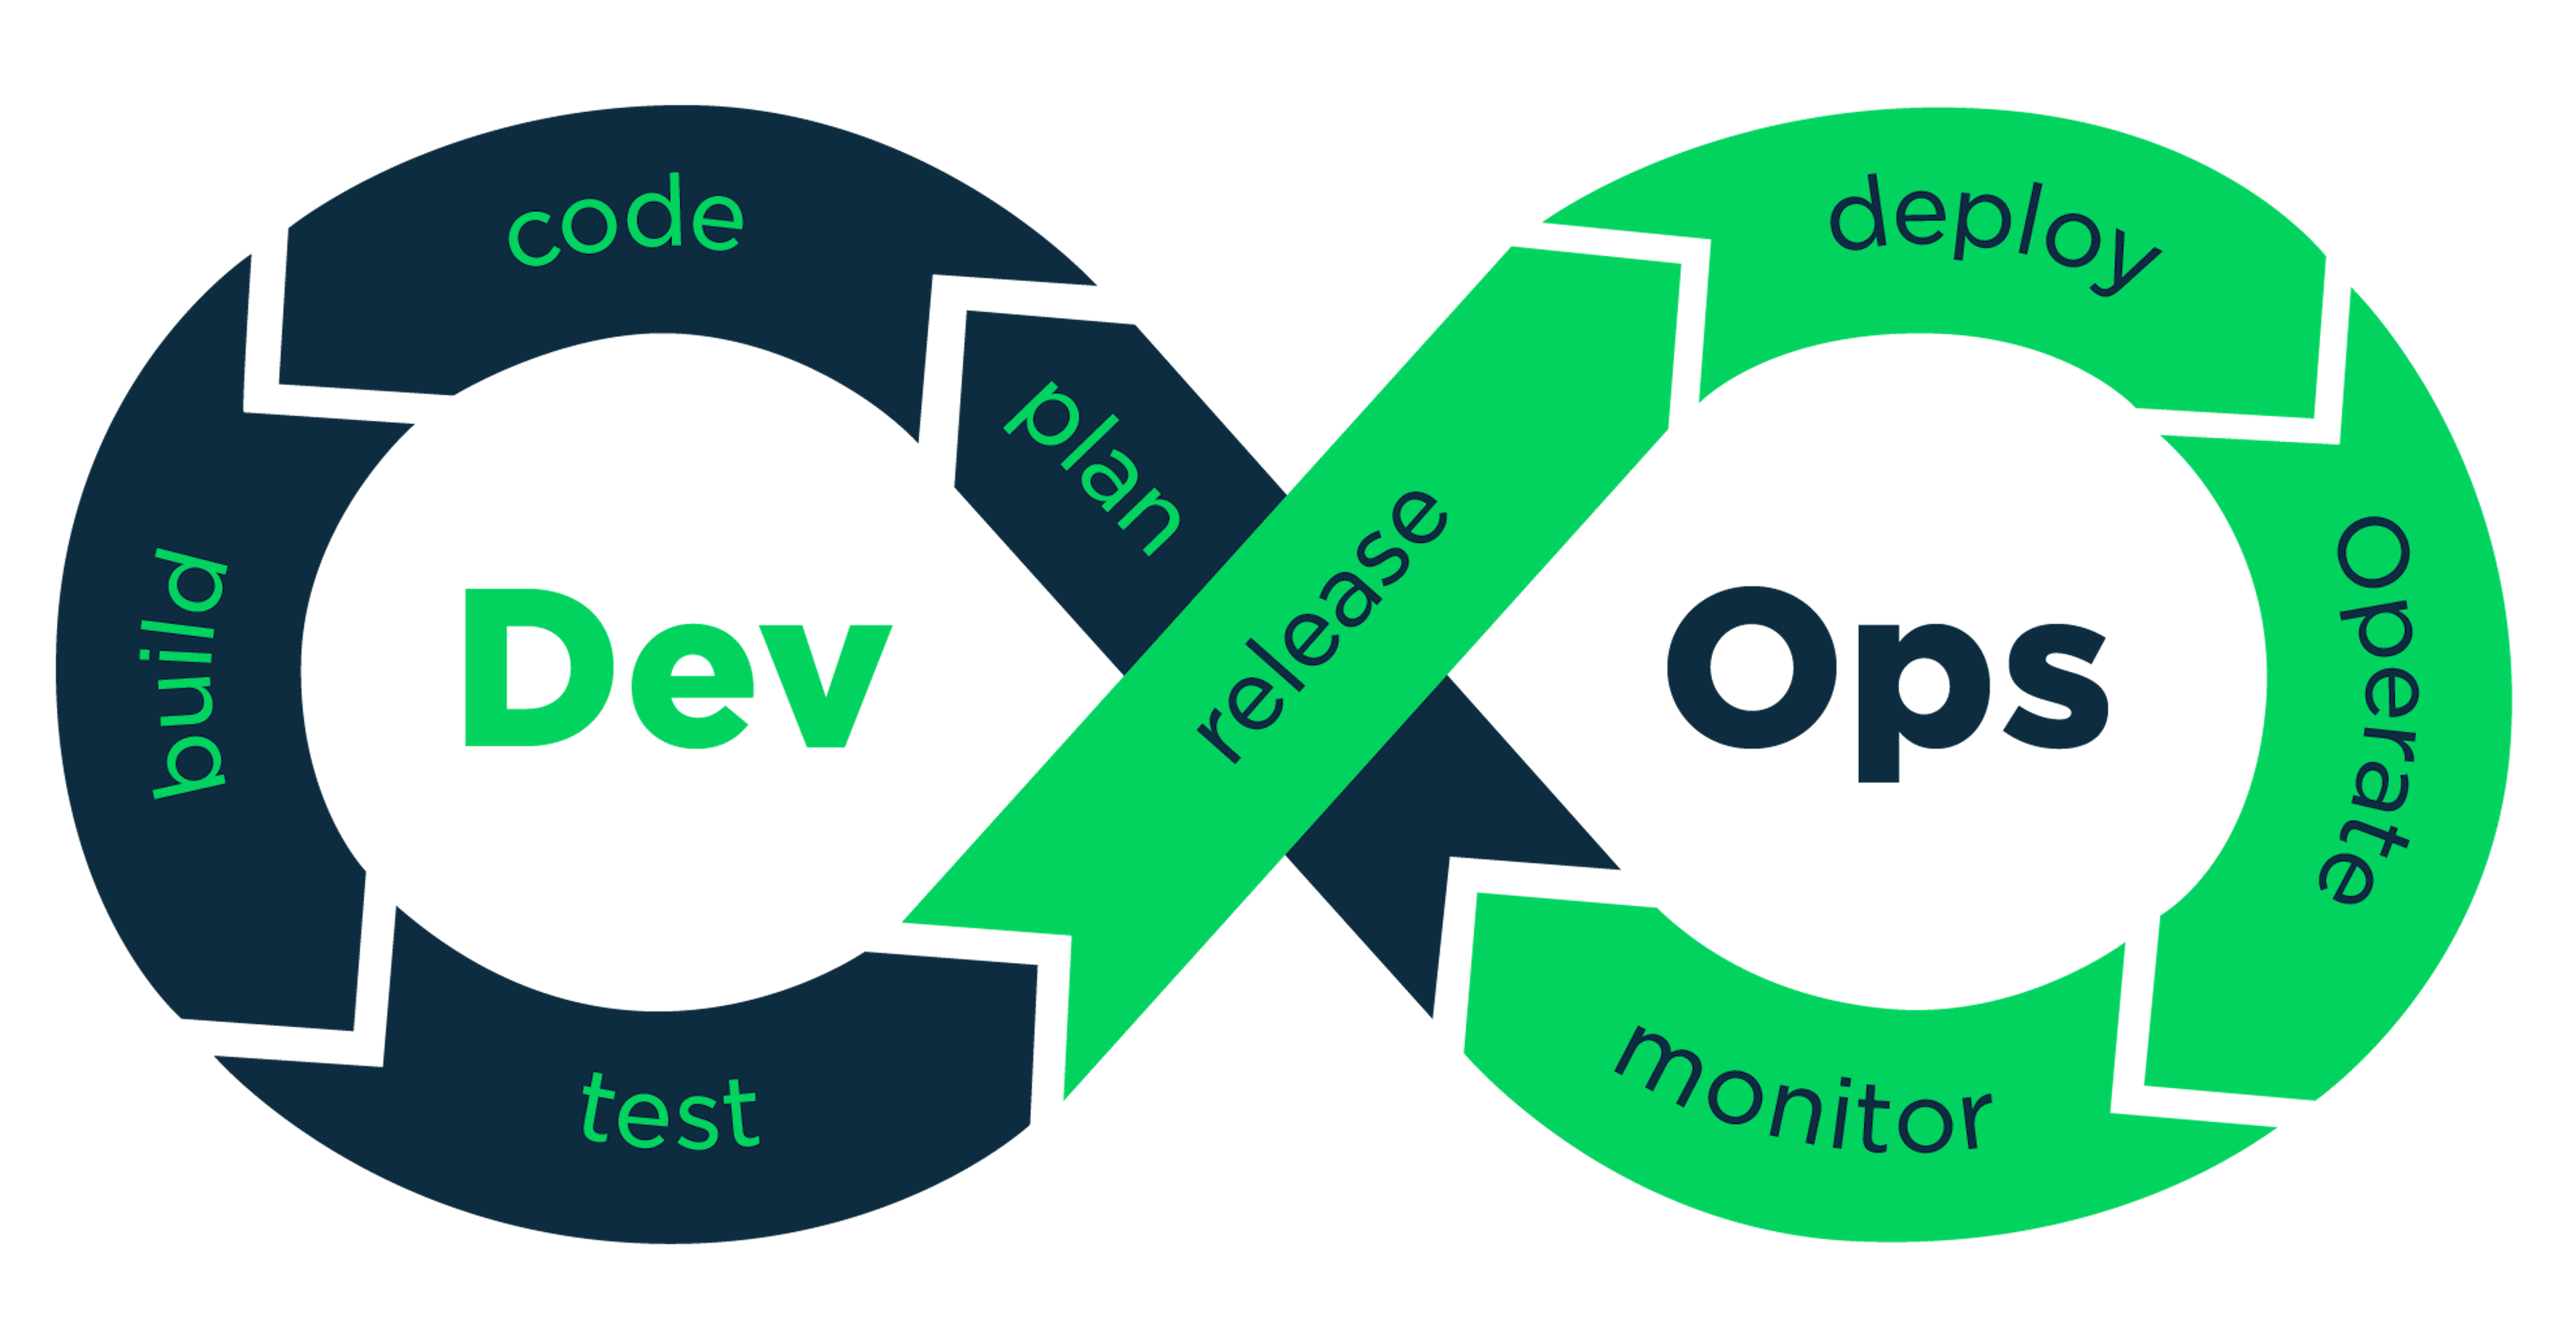 The reason for the infinity sign is because DevOps never ends, the process is continuous and should be considered more of a mindset than an activity to be completed.